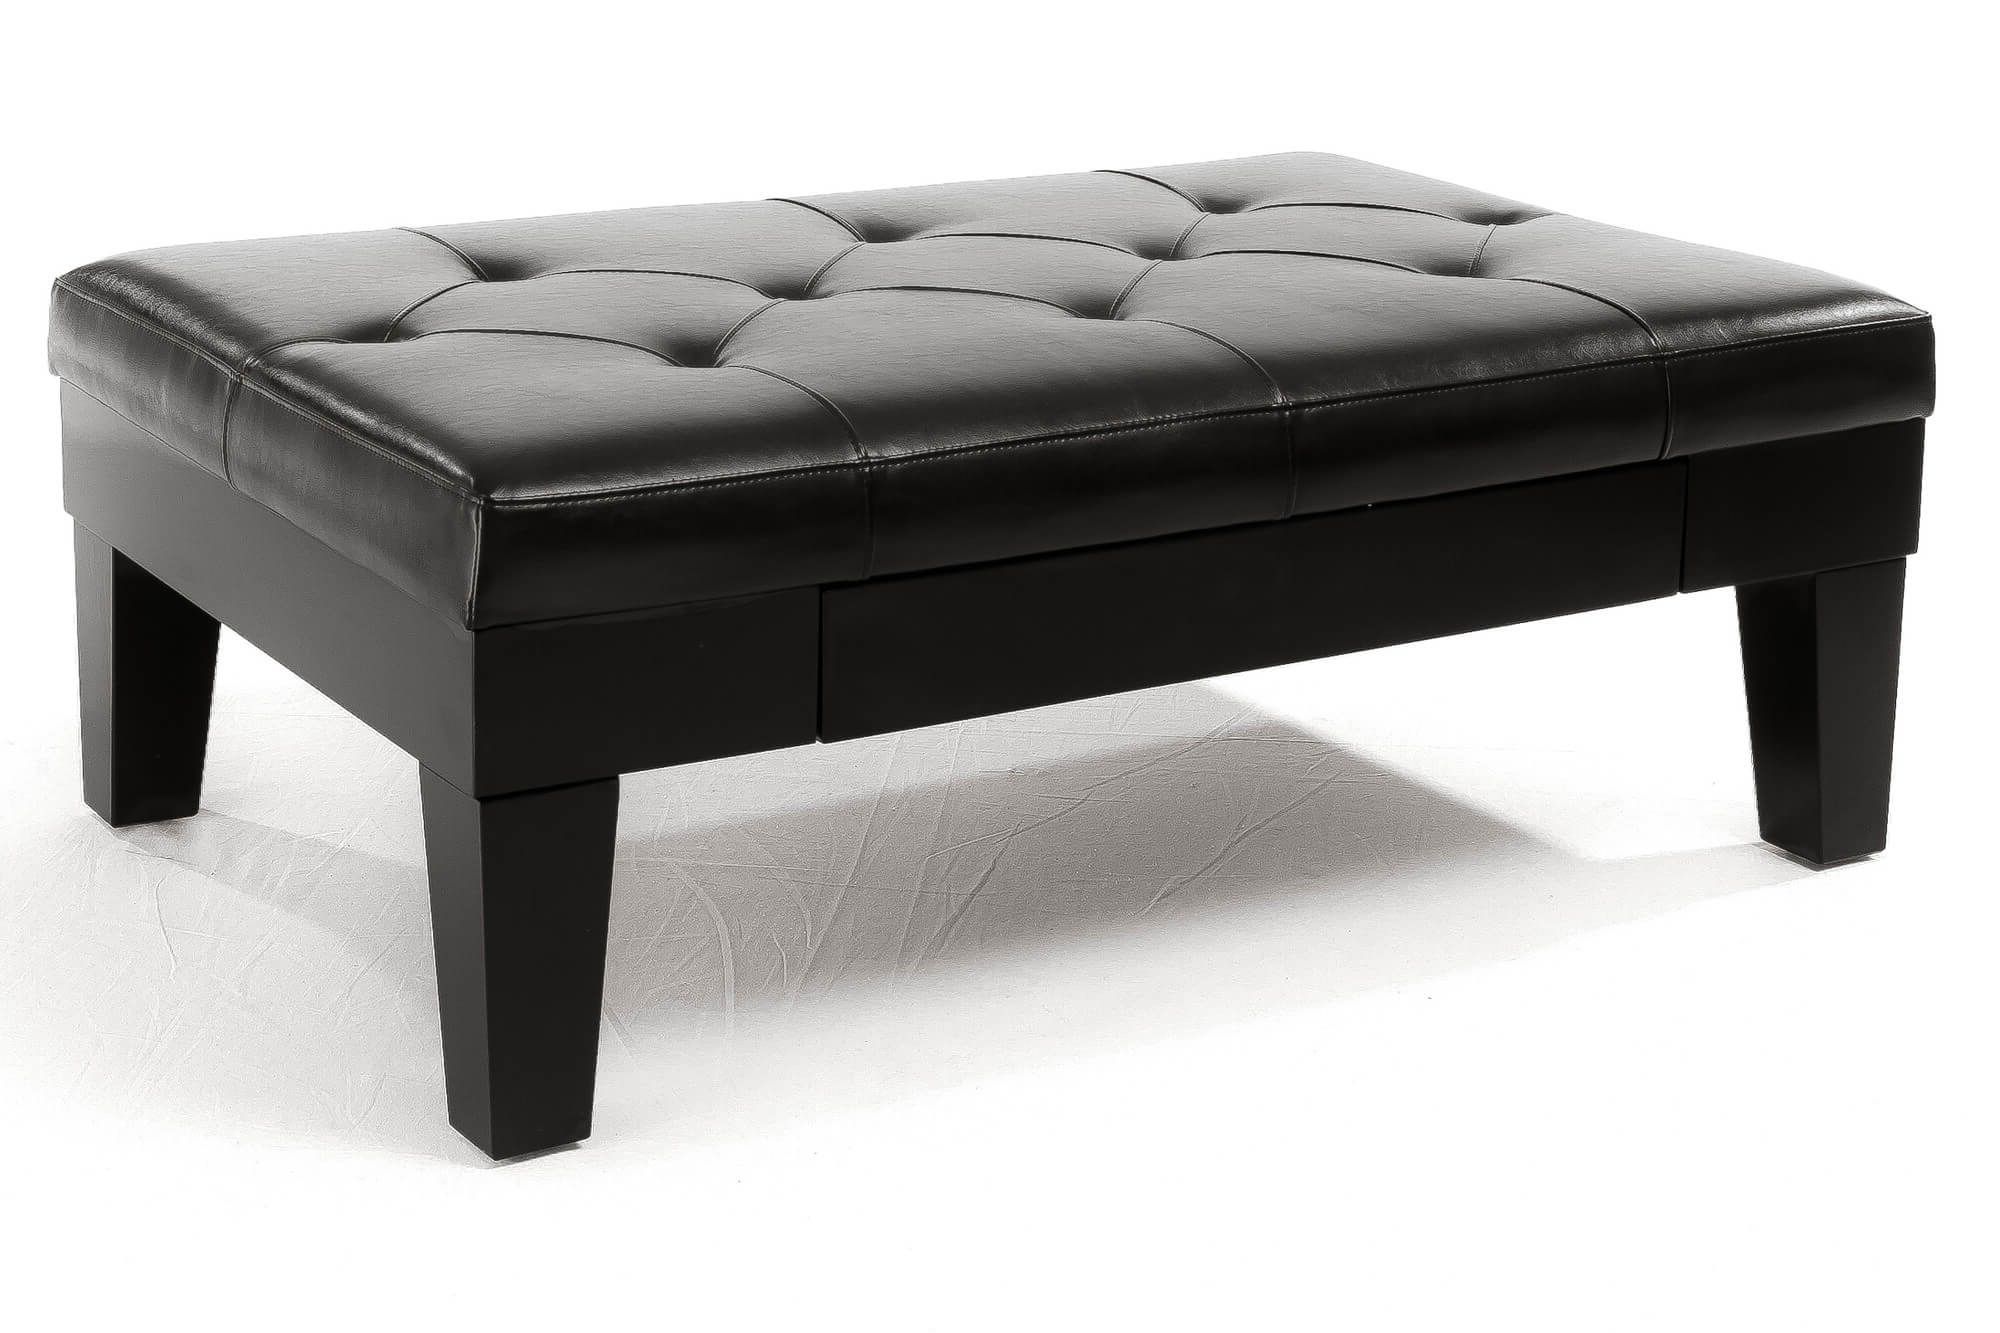 Newest Round Button Tufted Coffee Tables Intended For 36 Top Brown Leather Ottoman Coffee Tables (View 10 of 20)